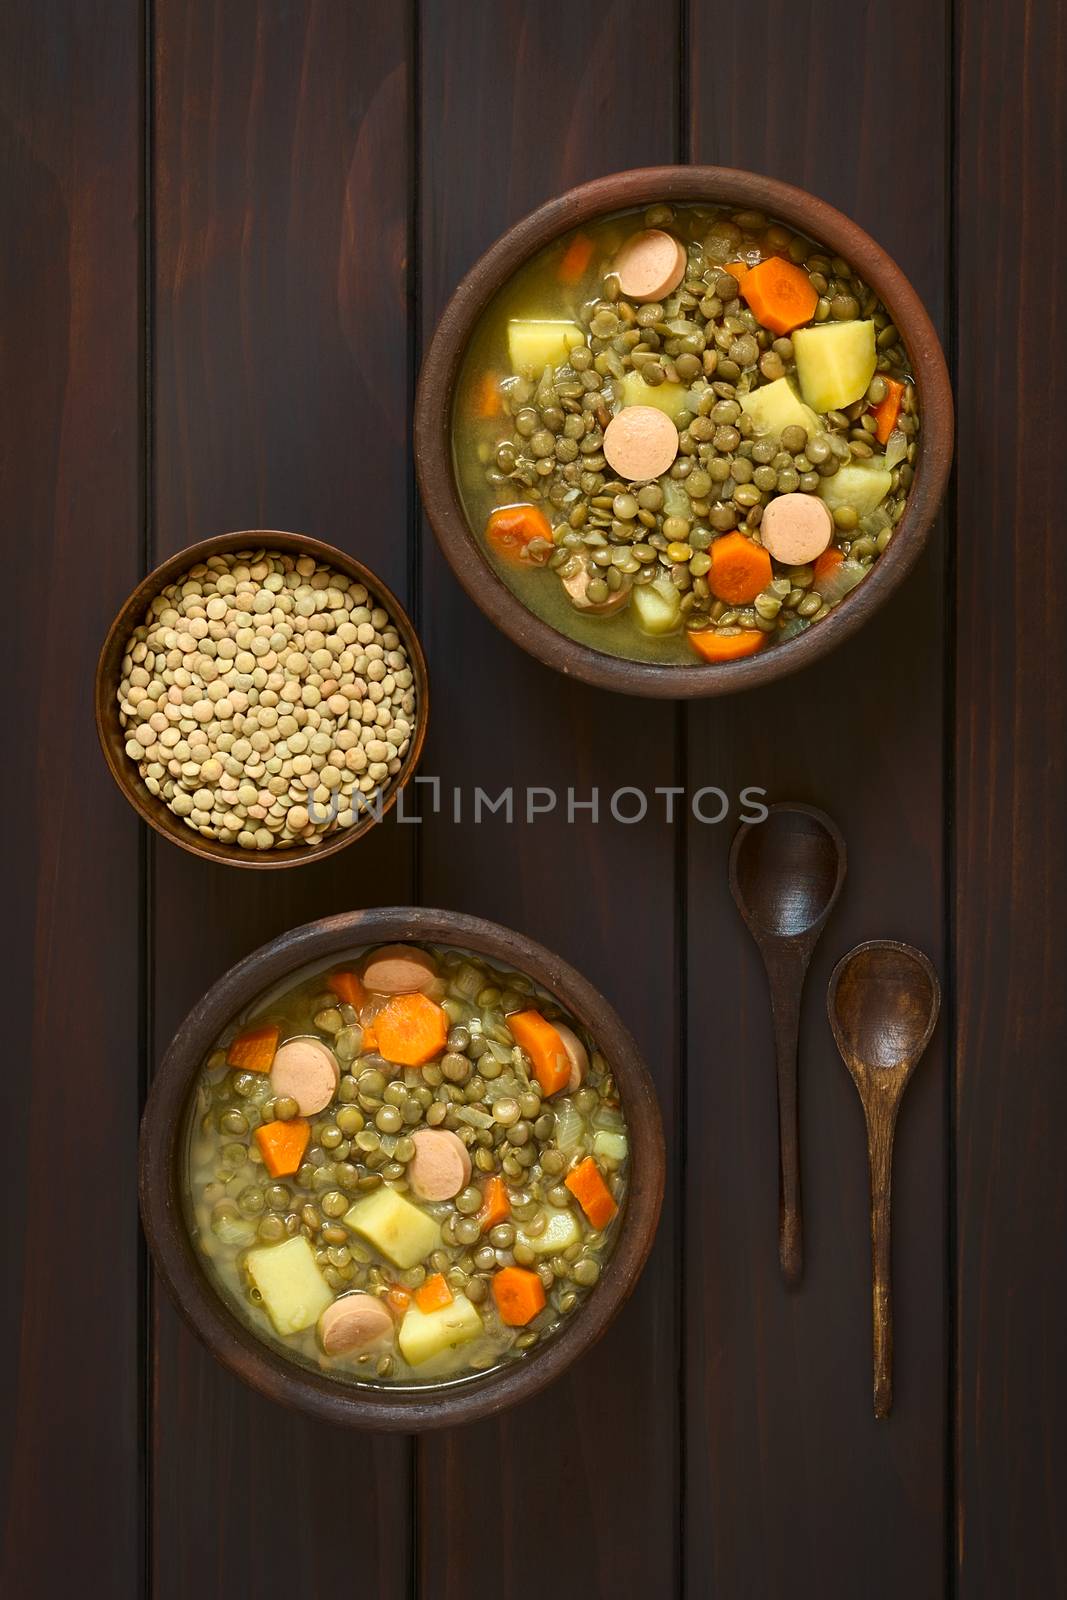 Overhead shot of two rustic bowls of lentil soup made with potato, carrot, onion and sausage slices, with a small bowl of raw lentils and wooden spoons on the side, photographed on dark wood with natural light